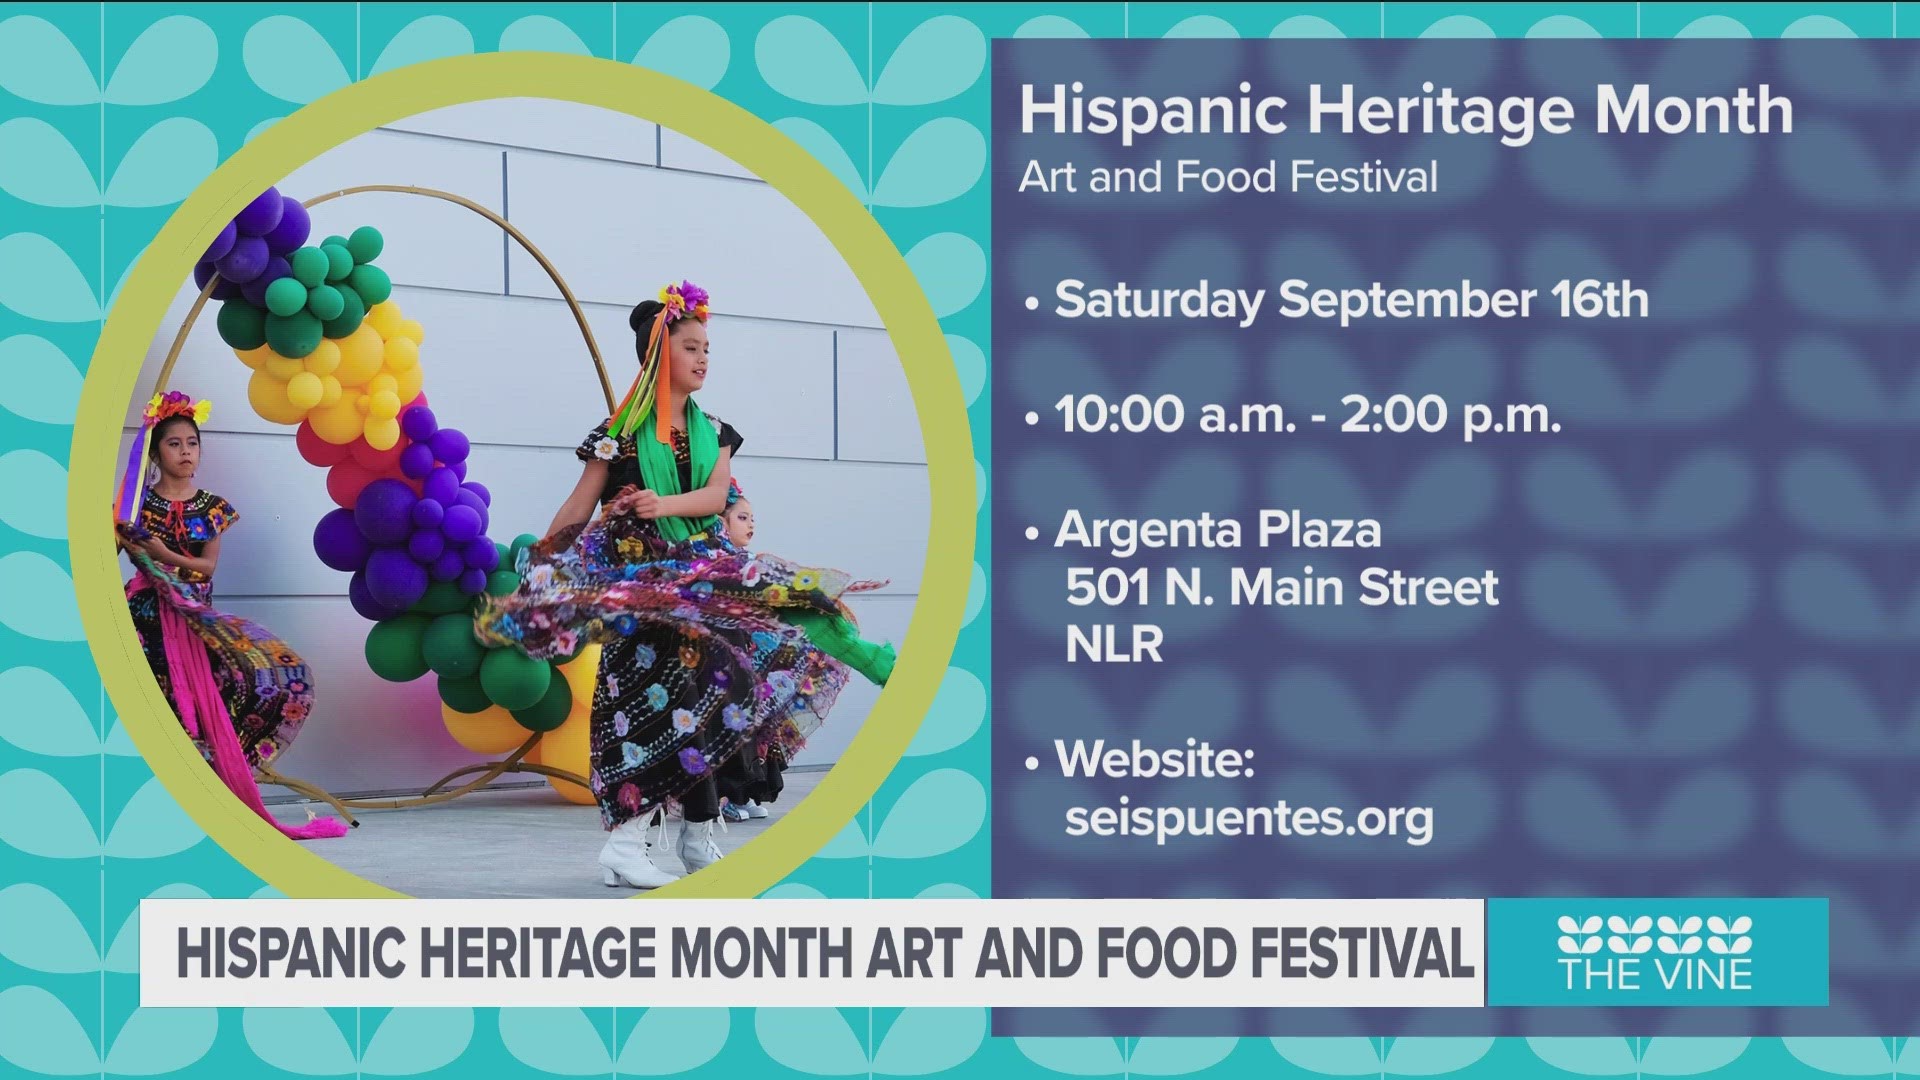 Raul Fernández  and Irene Alamilla tell us about the upcoming celebration of Latinx culture.